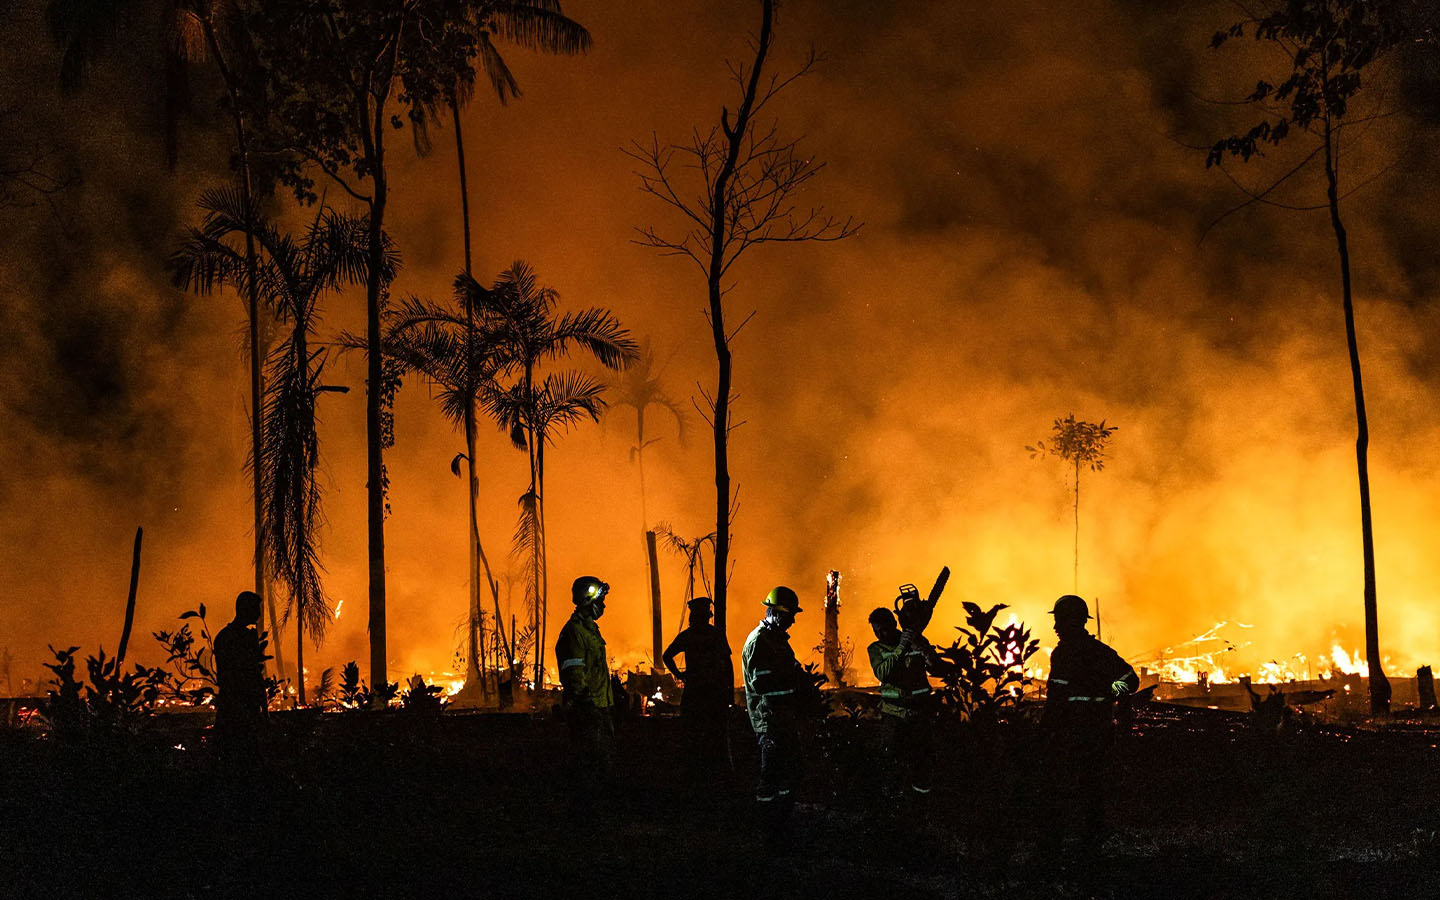 Reduced funding is contributing to record-breaking wildfires in the Amazon